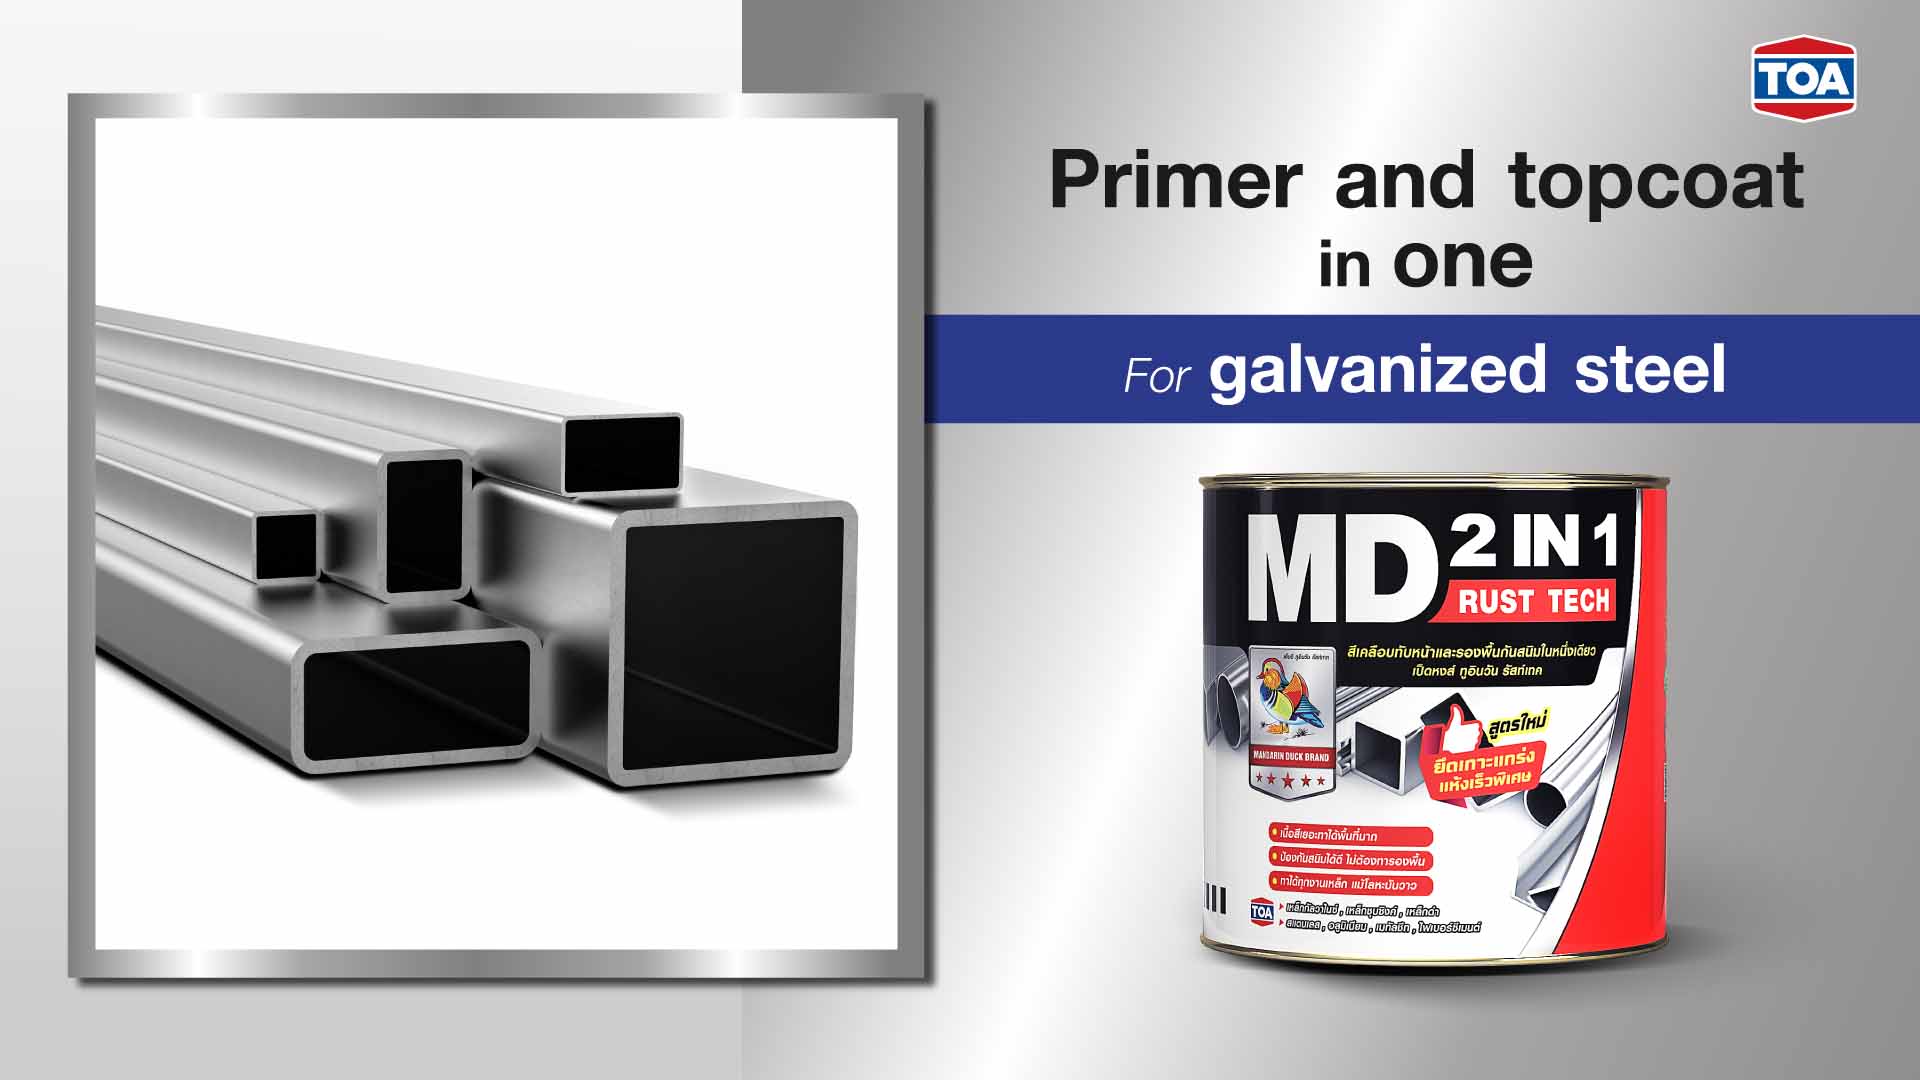 MD 2IN1 RUST TECH is primer and topcoat in one for galvanized stell 